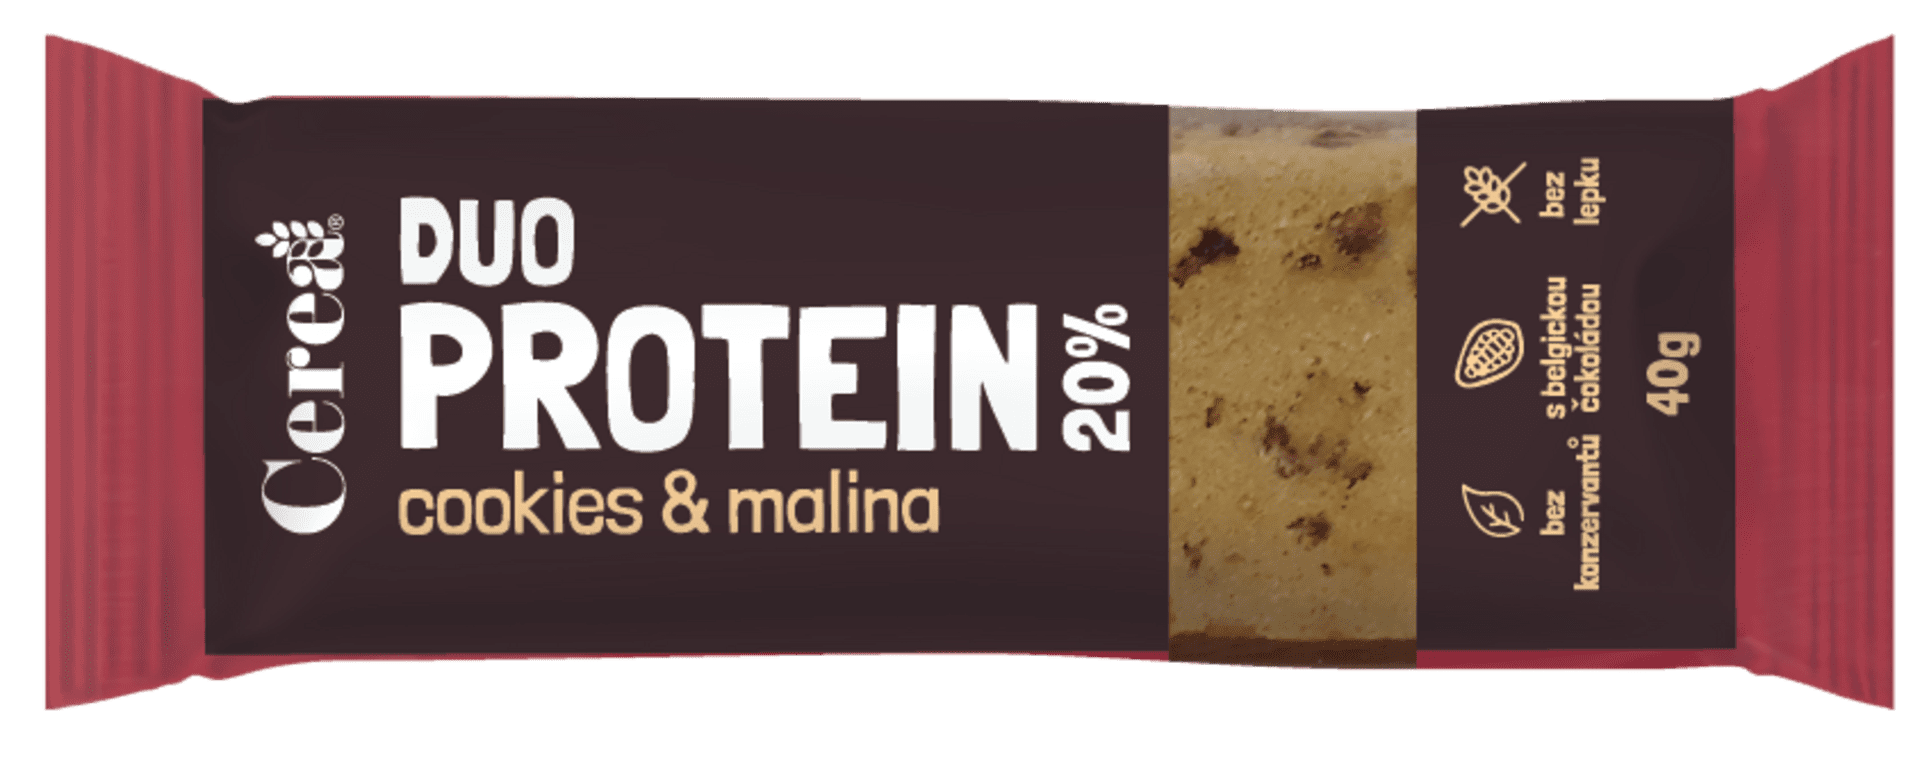 Cerea DUO PROTEIN Cookies & Malina 40 g expirace